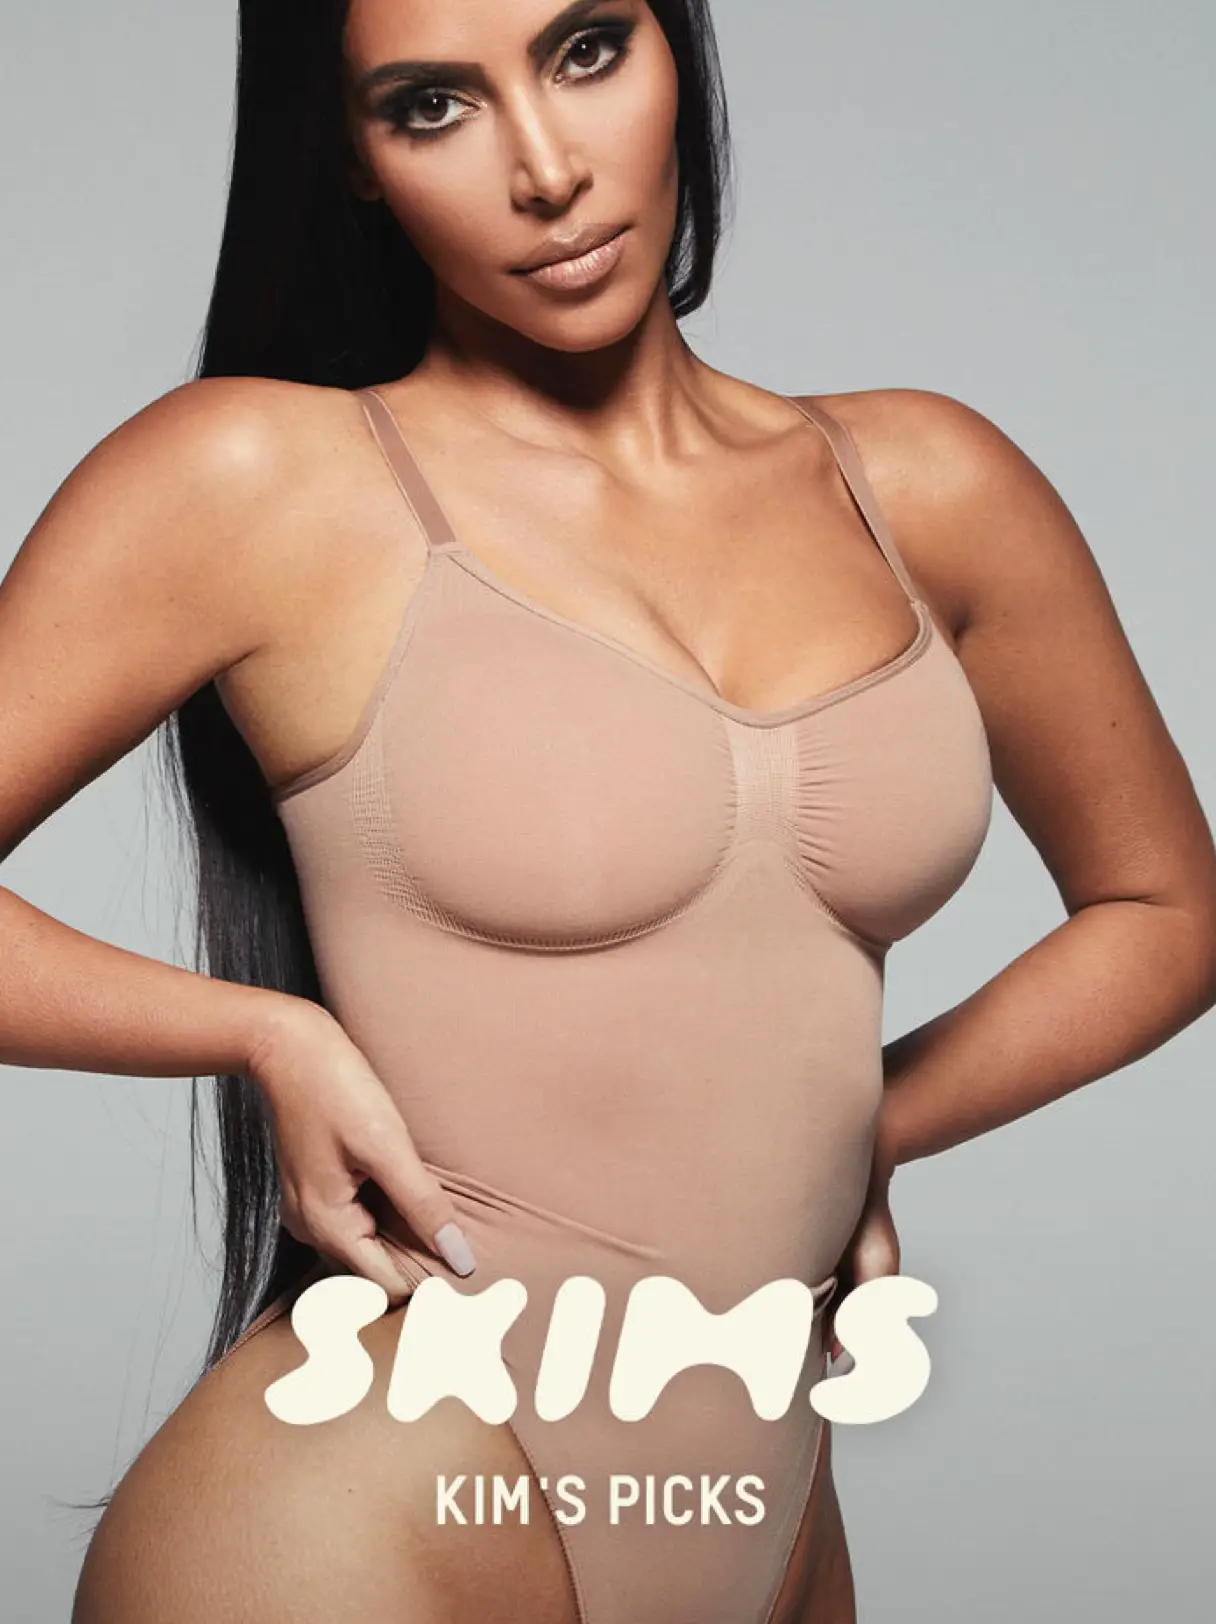 A bra that shows NO lines?! YES PLEASE! #skims #skimsreview